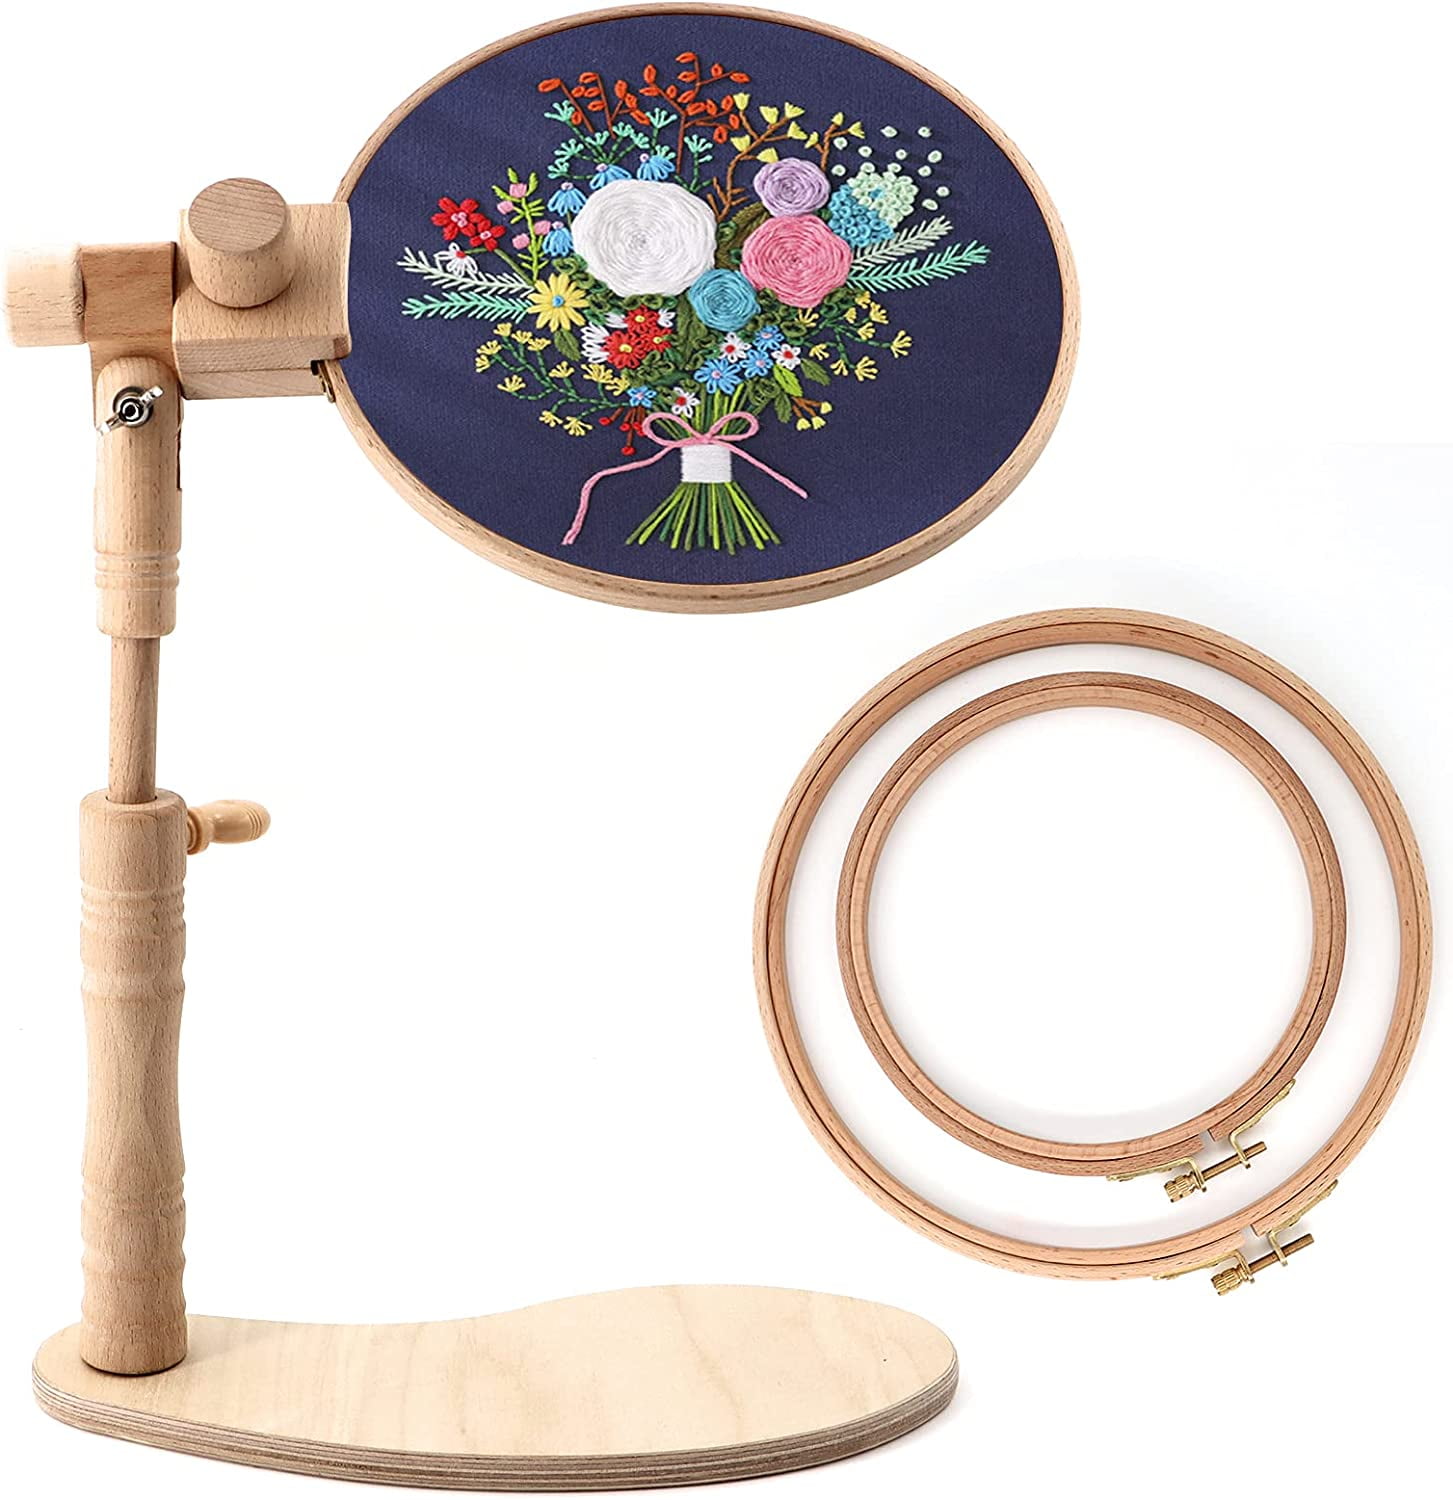 jasvelly adjustable embroidery stand, rotated cross stitch hoop holder,  wood 983234 embroidery stand embroidery hoop stand